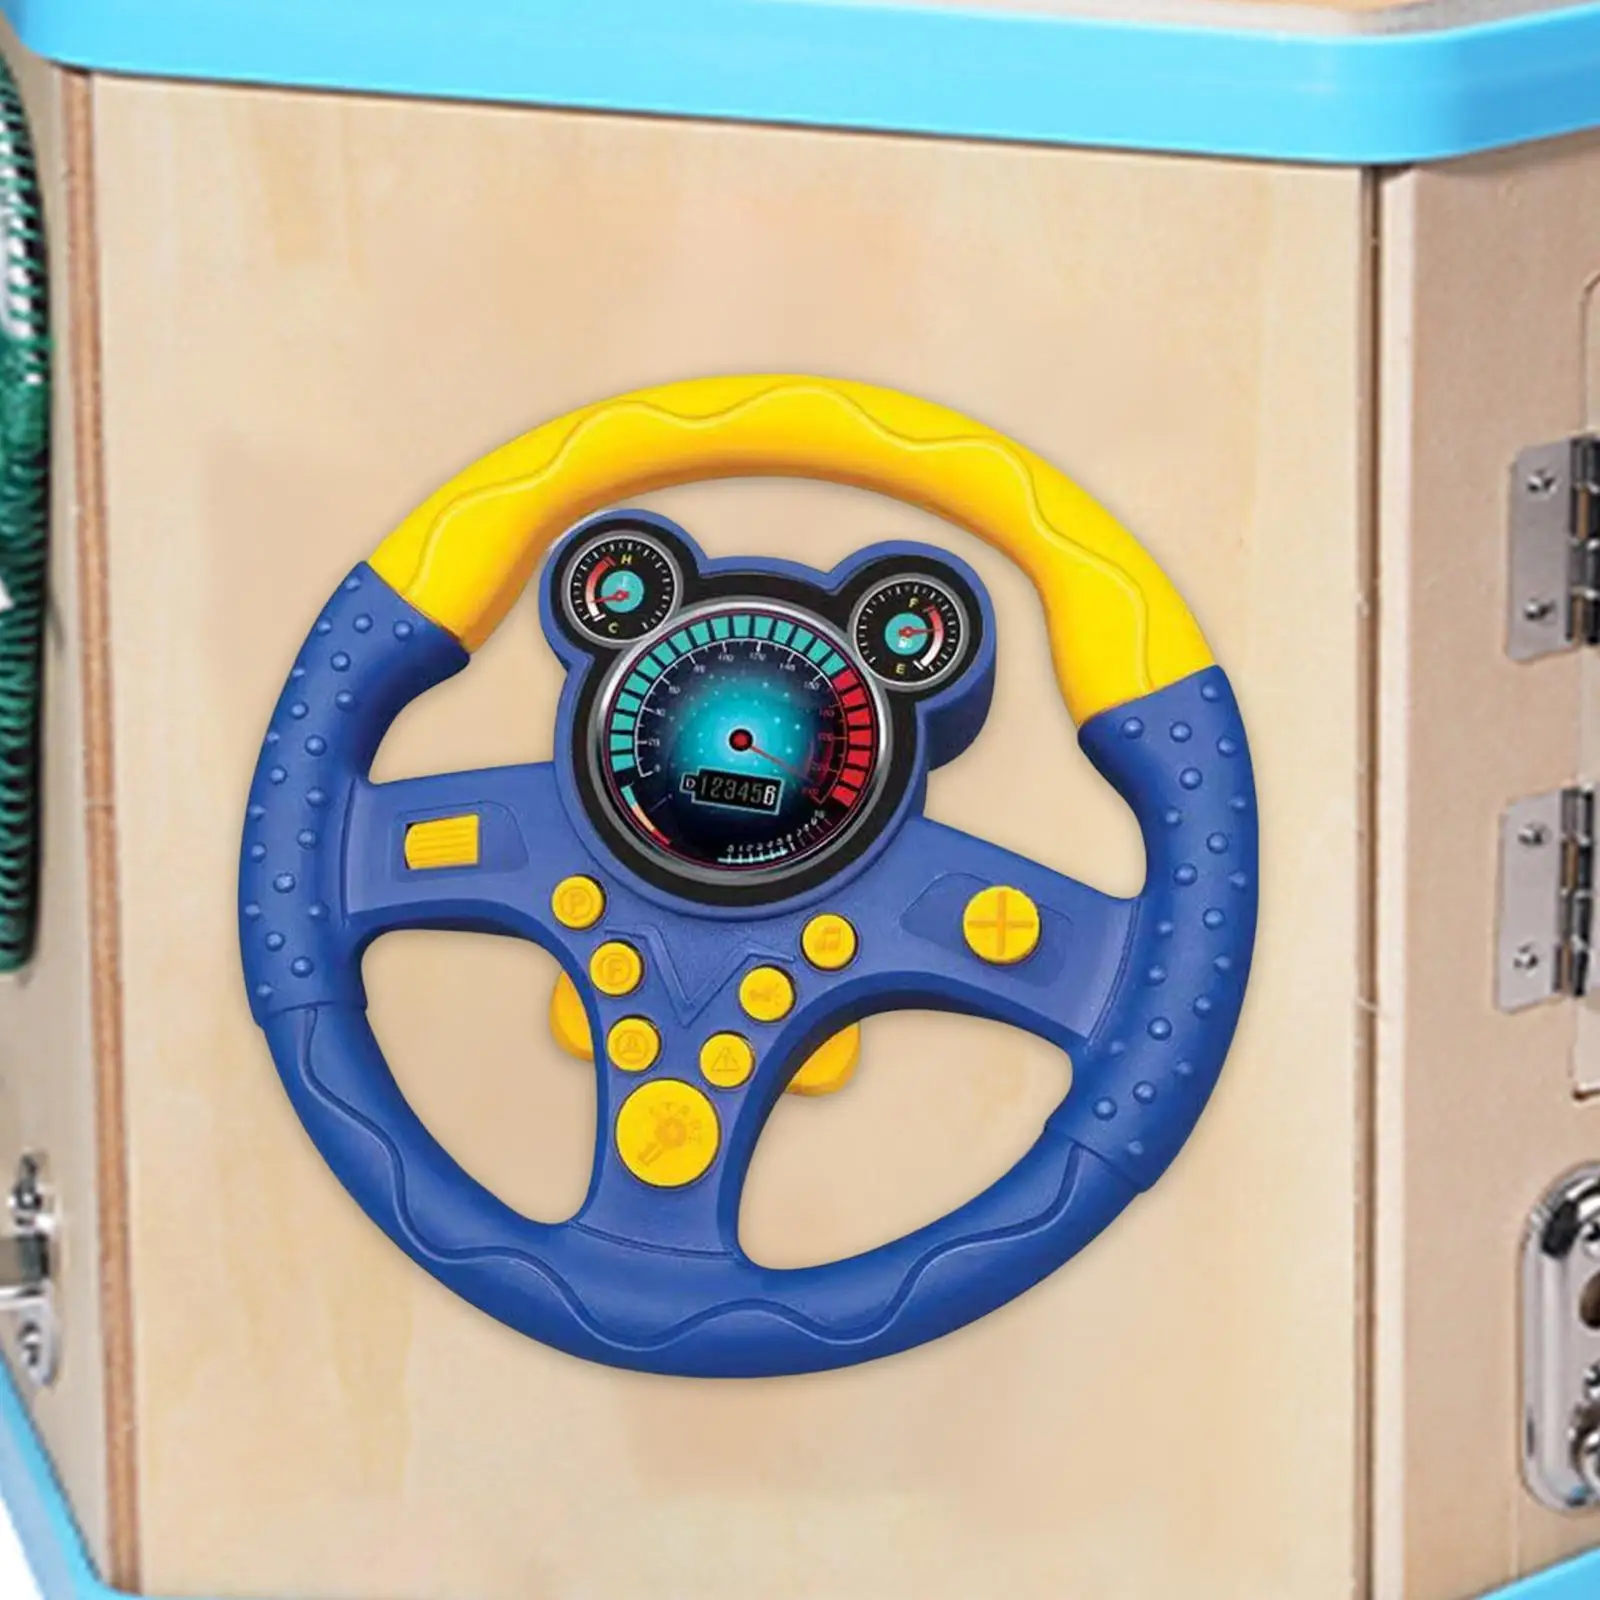 Simulation Steering Wheel Toy Musical Activity Toy Pretend Driving Toy for Park Climbing Frame Playground Kids Gifts